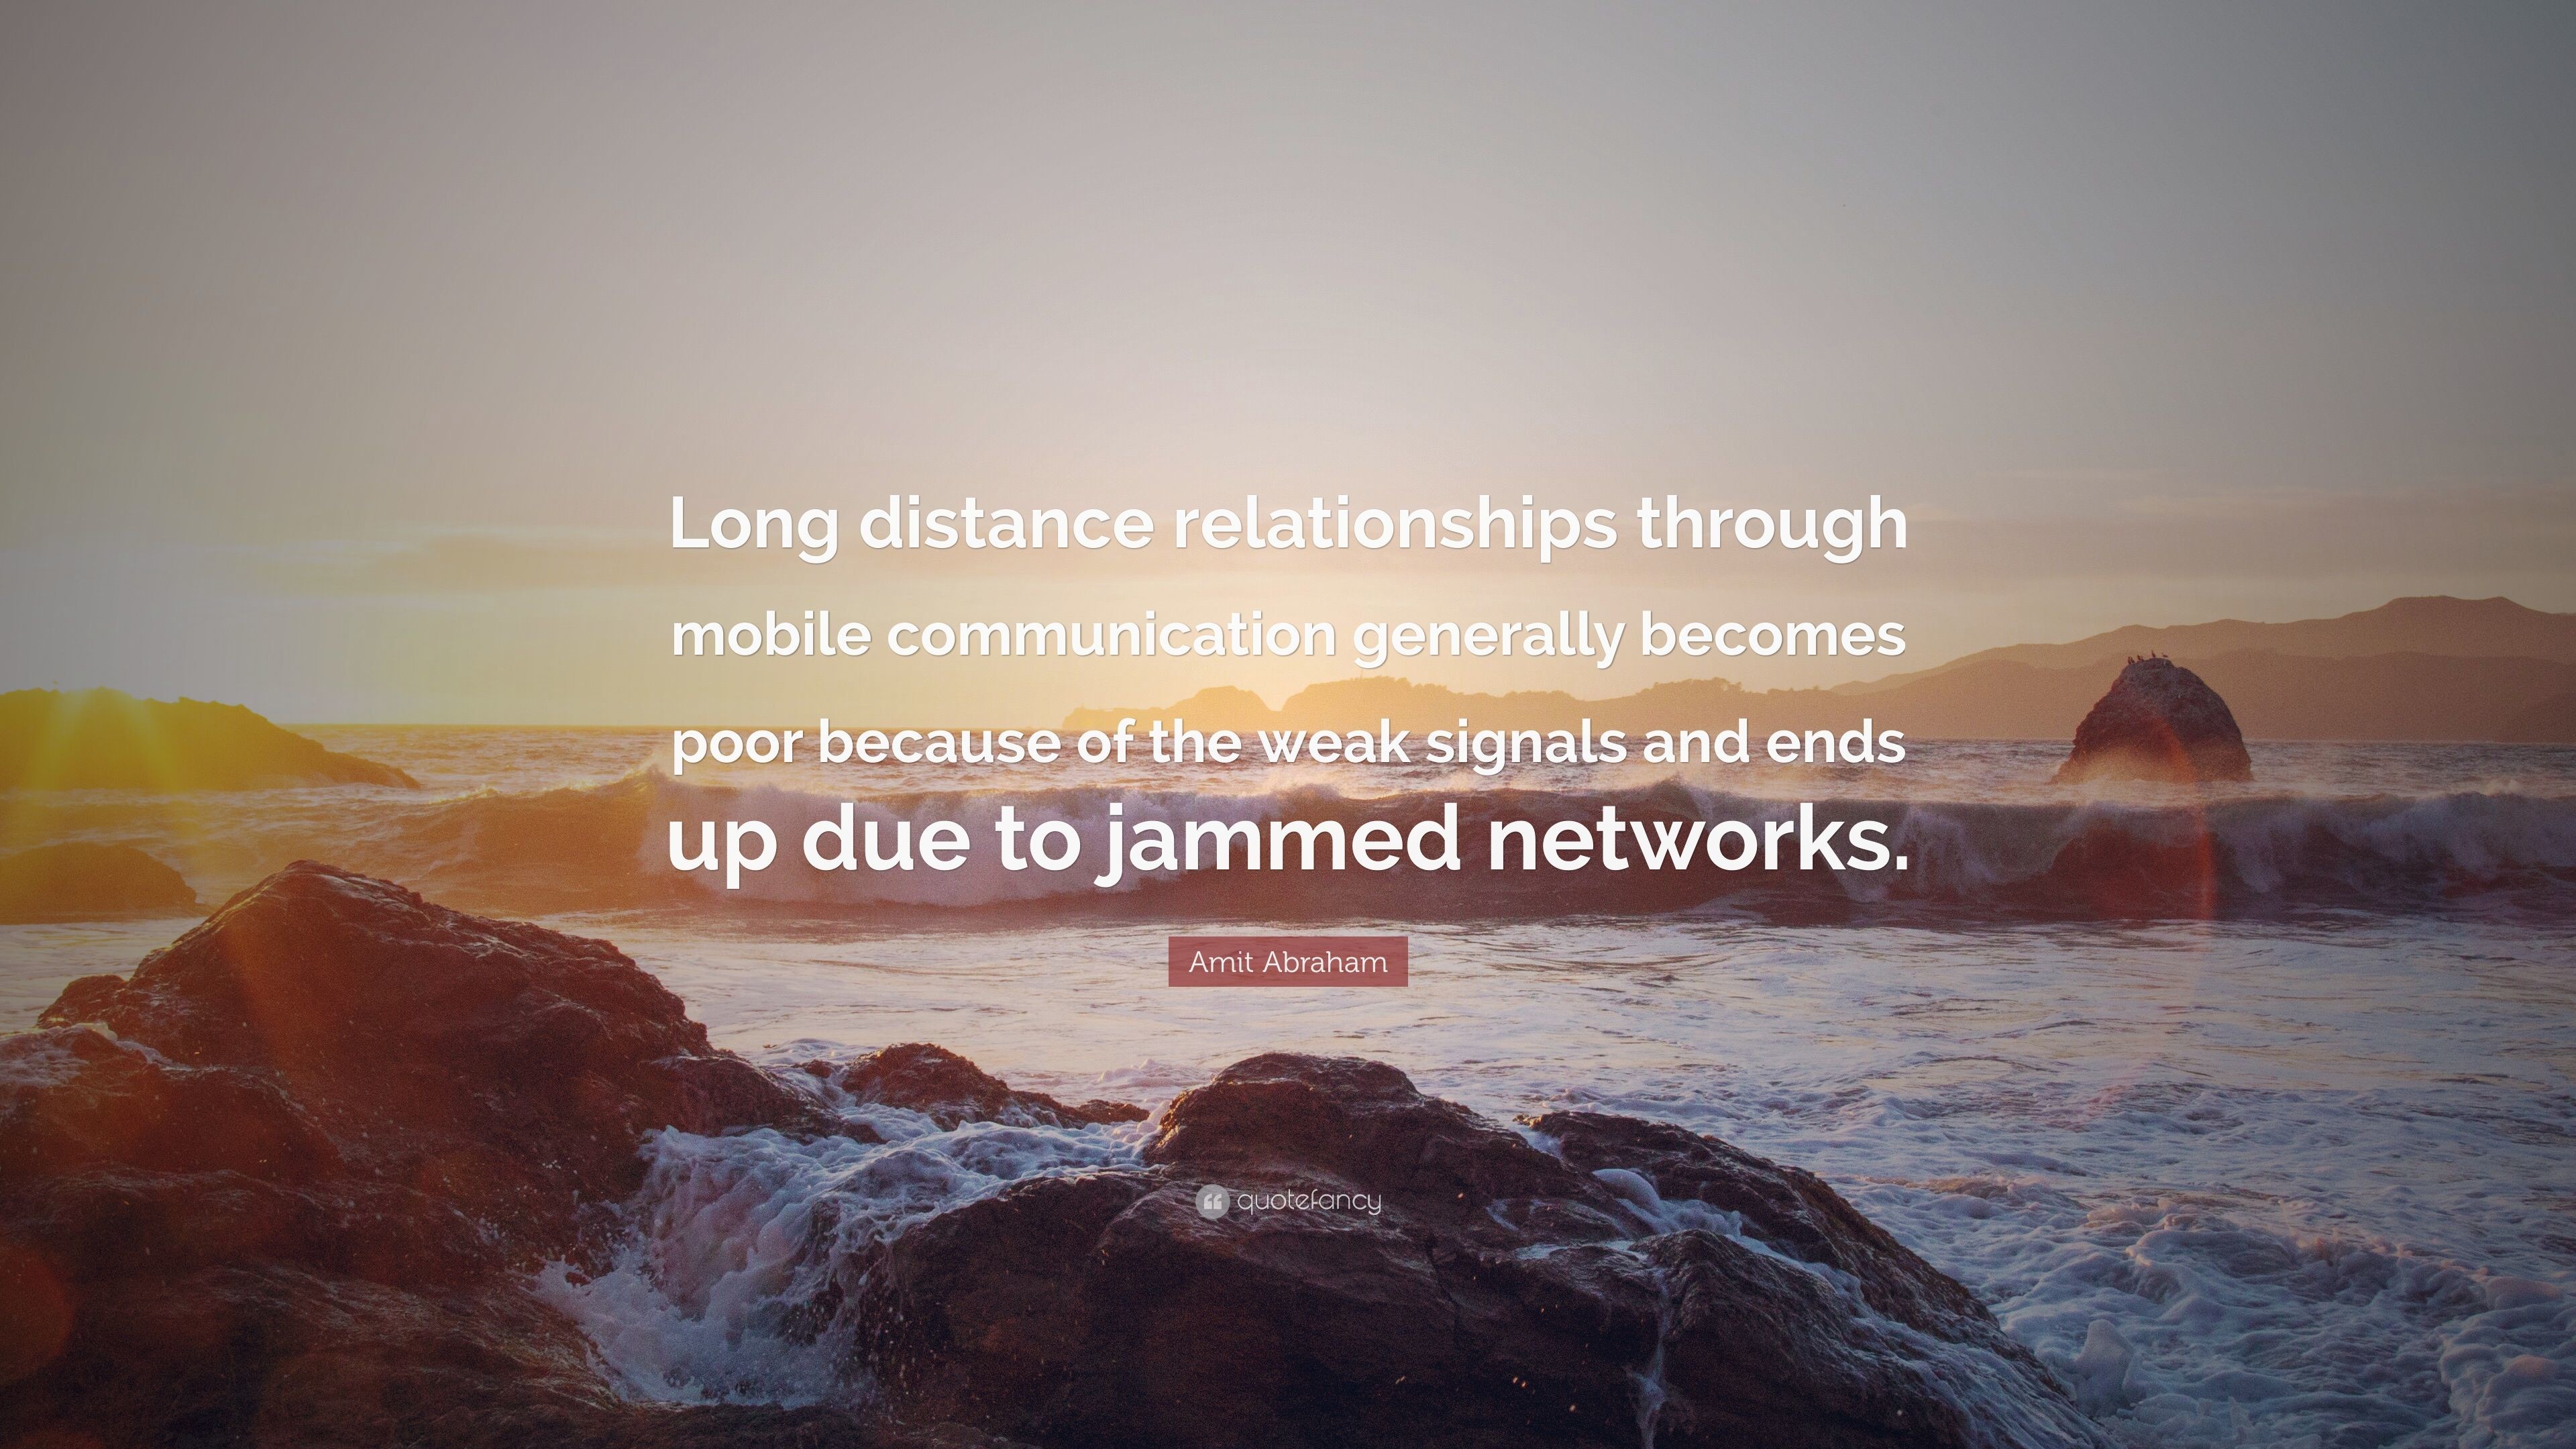 3840x2160 Amit Abraham Quote: “Long distance relationships through mobile  communication generally becomes poor because of